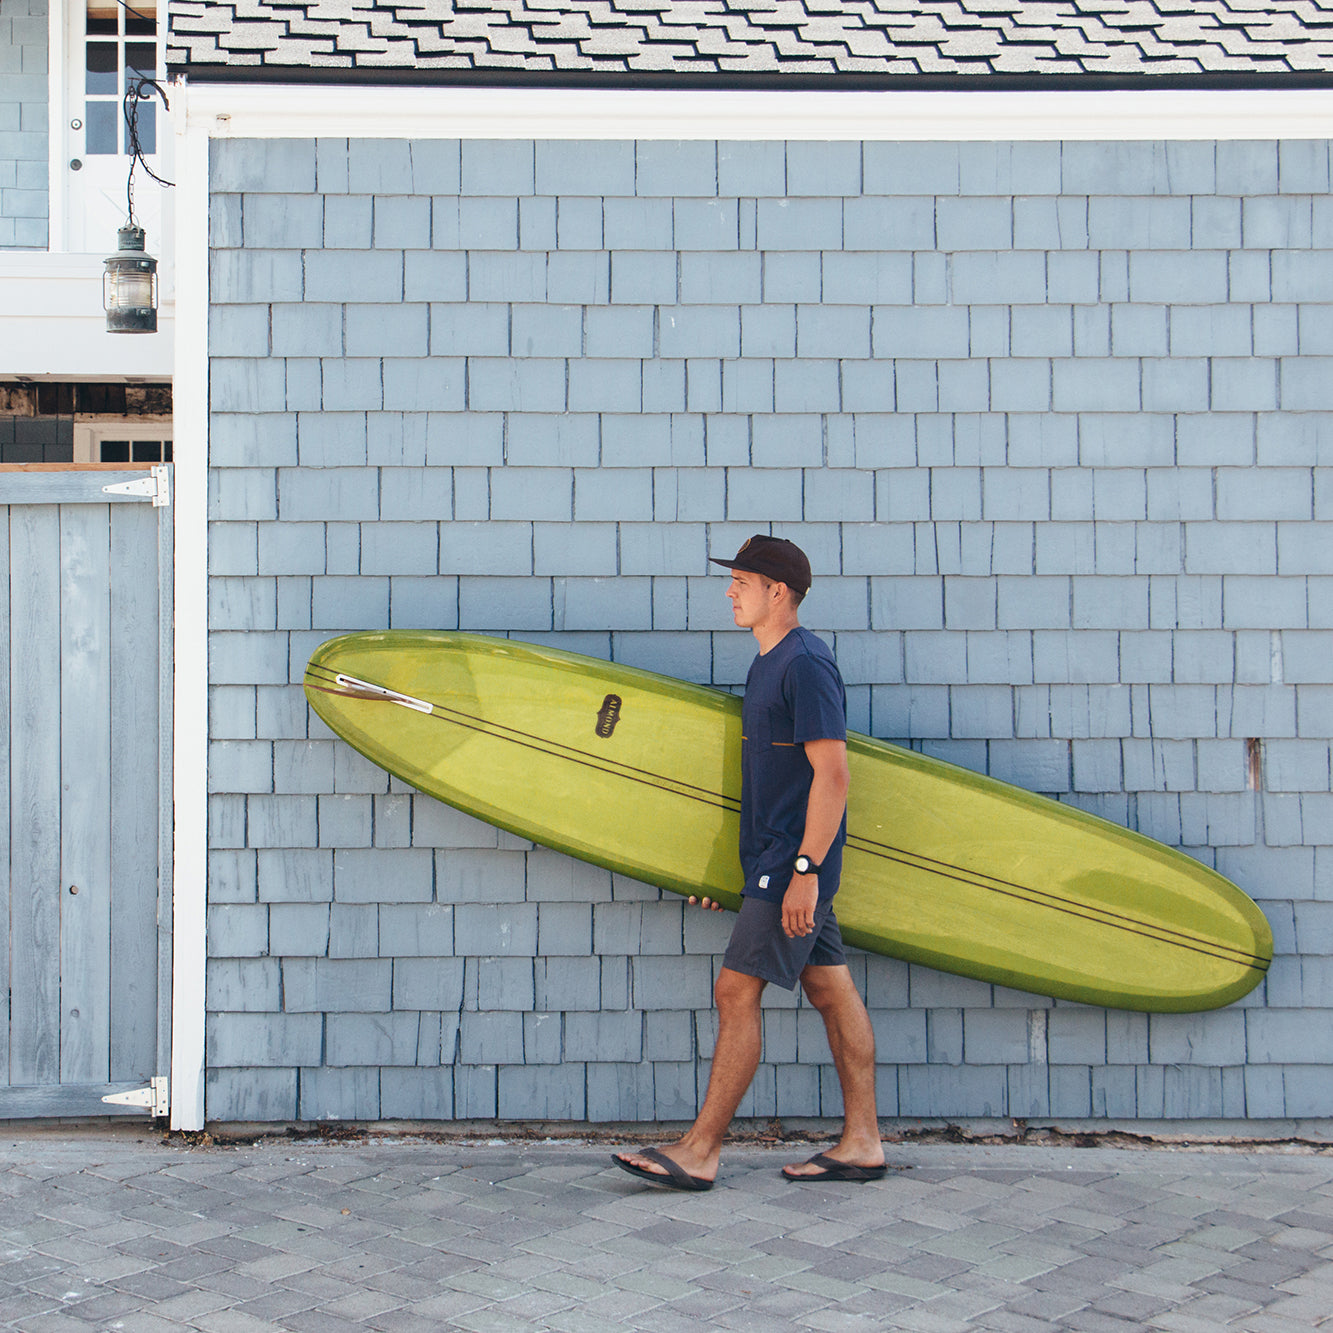 The Surf Thump | Almond Surfboards & Designs